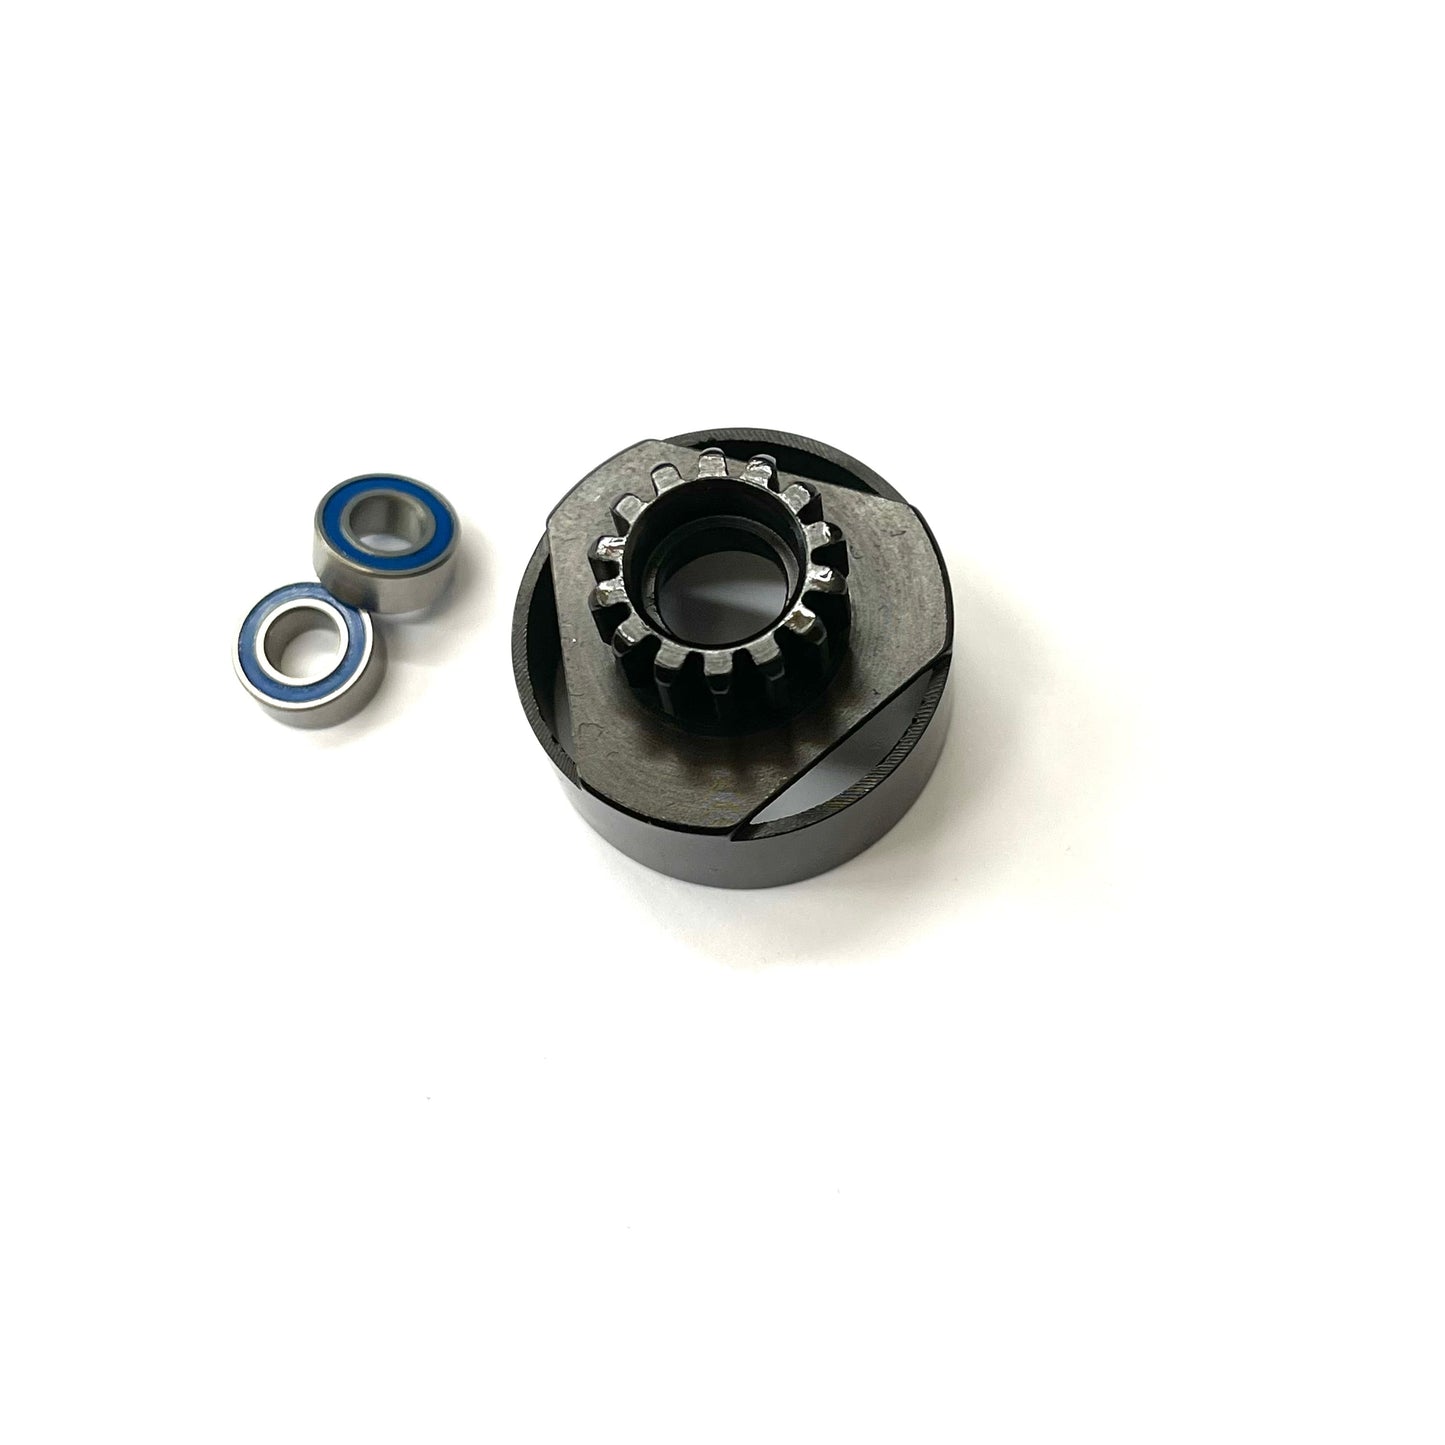 SMD Hard Steel Nitro Clutch Bell 14 tooth with Bearings.